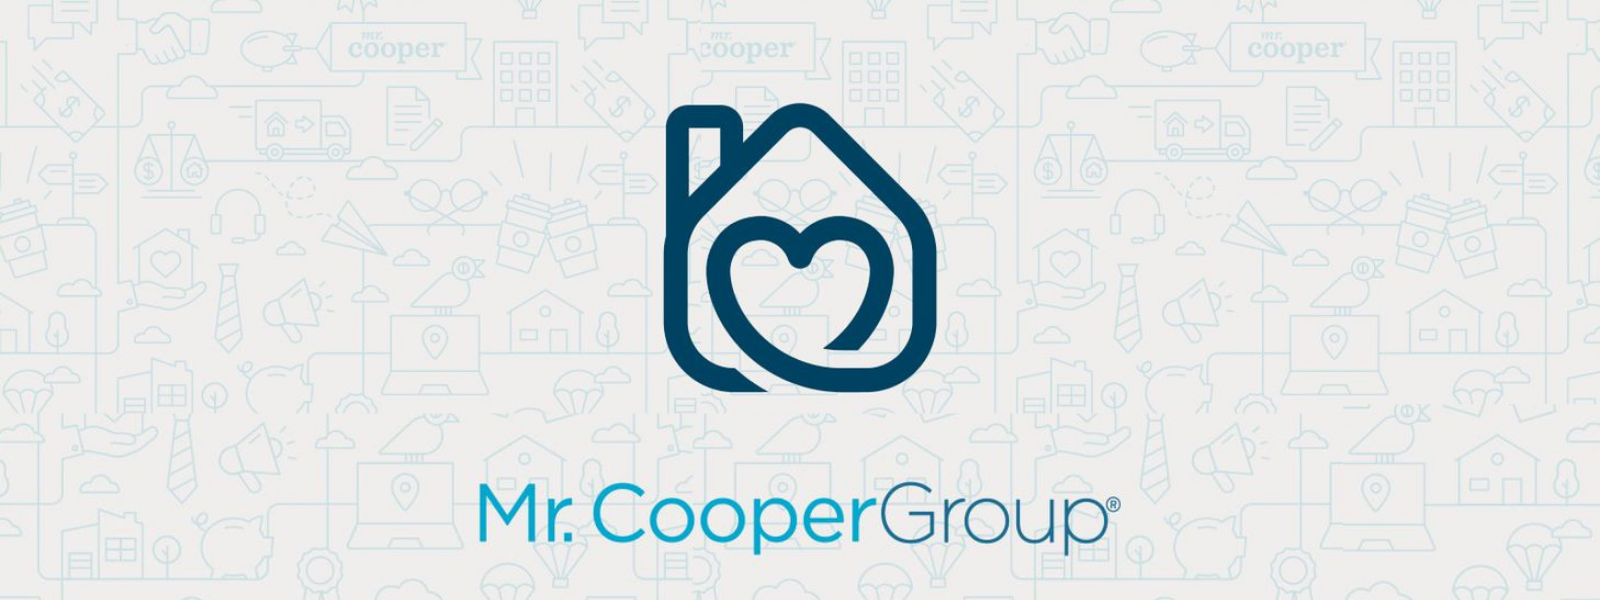 Graphic of a heart inside a house icon above the words Mr. Cooper Group